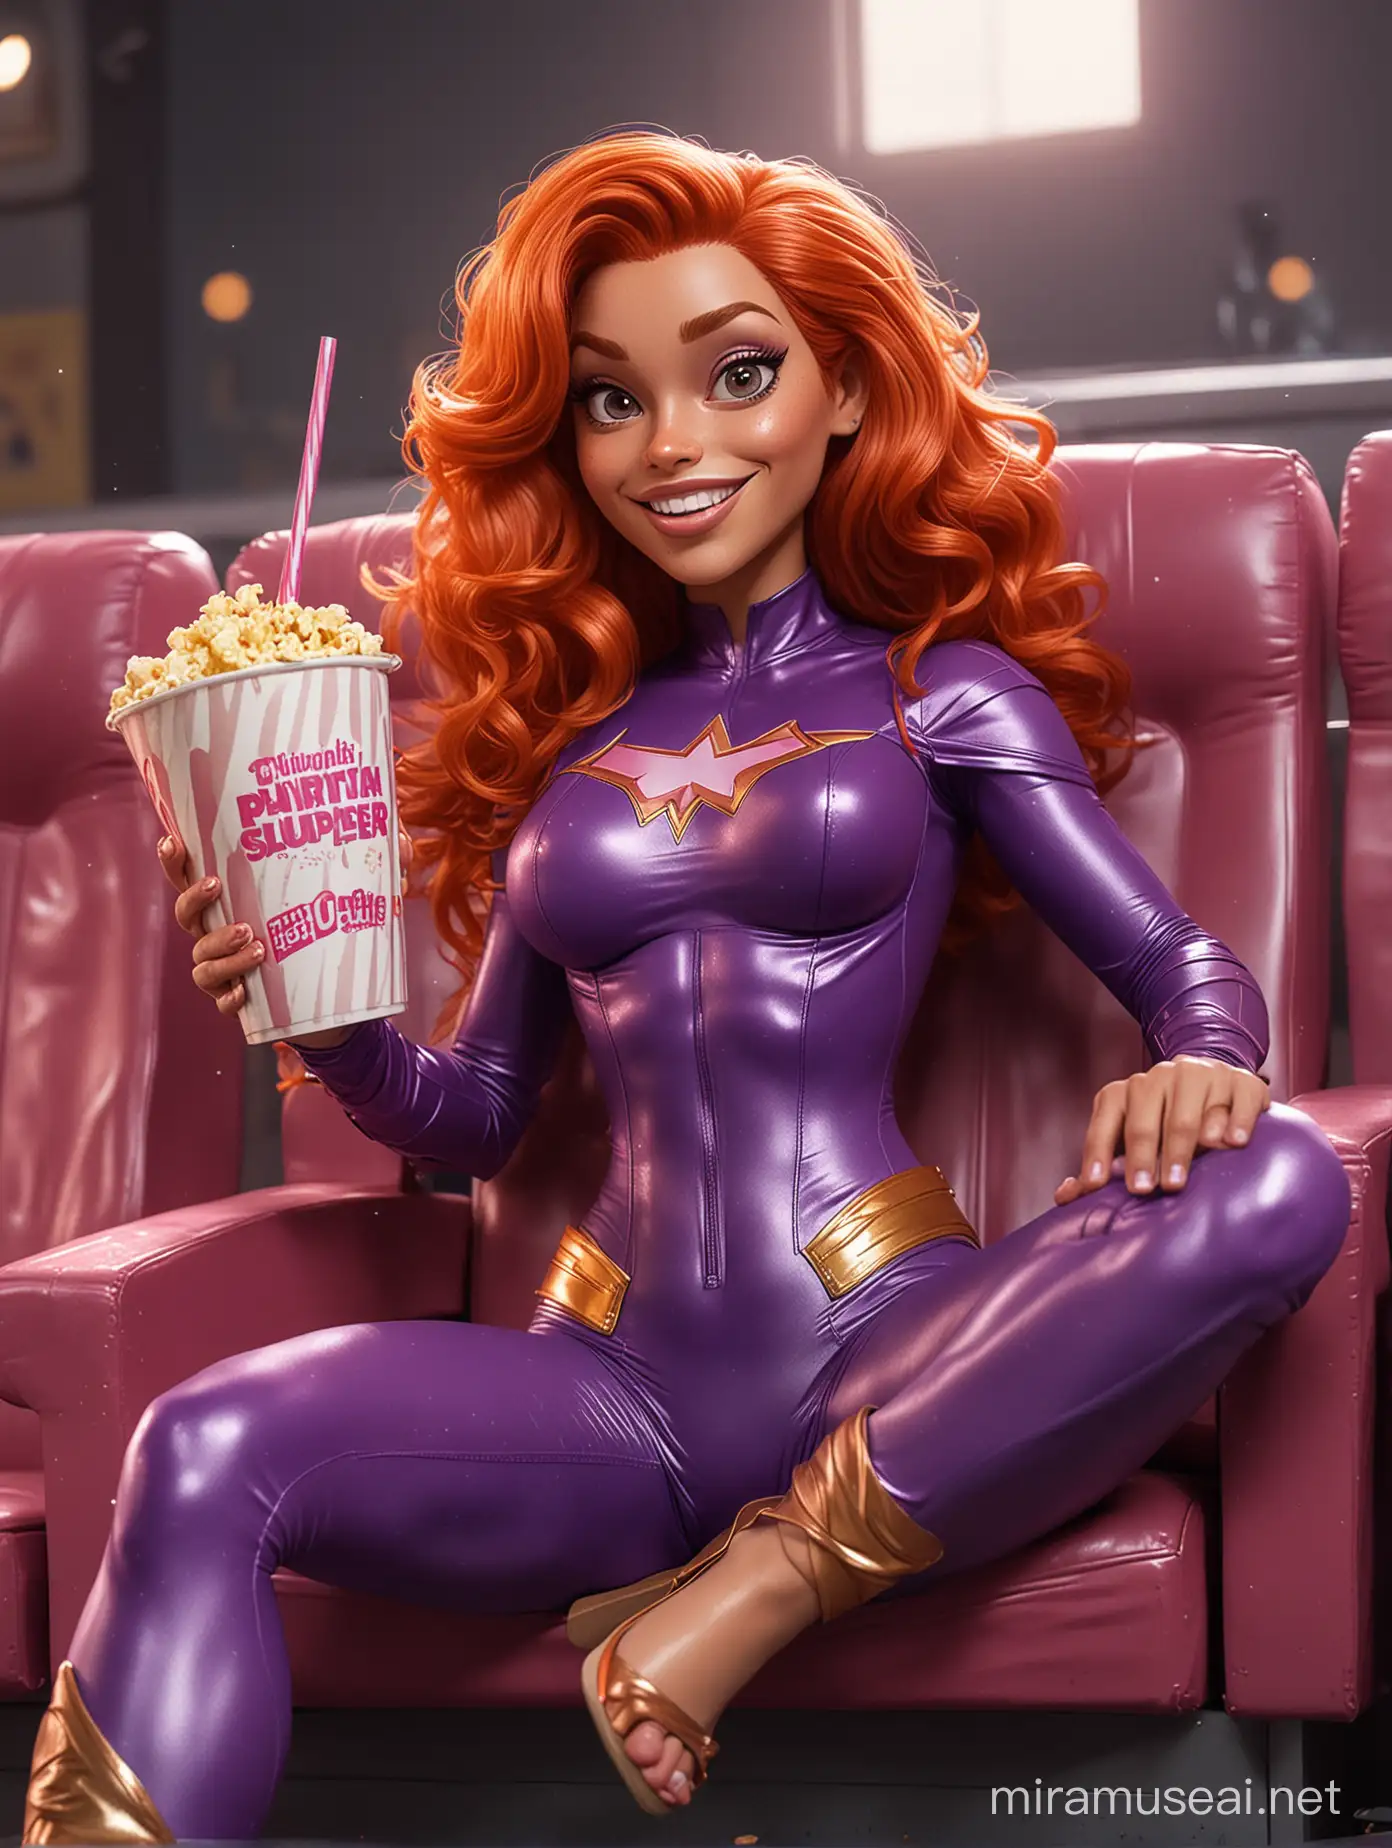 Make full-body red-haired Starfire from DC Comics illustration in caricature artstyle, with its original purple latex superhero less skin-exposed suit, sitting with feet folded on a cinema seat, holding popcorn box and a cup of slurpee, eyes on the screen, watching the movie with slighlty happy expression
